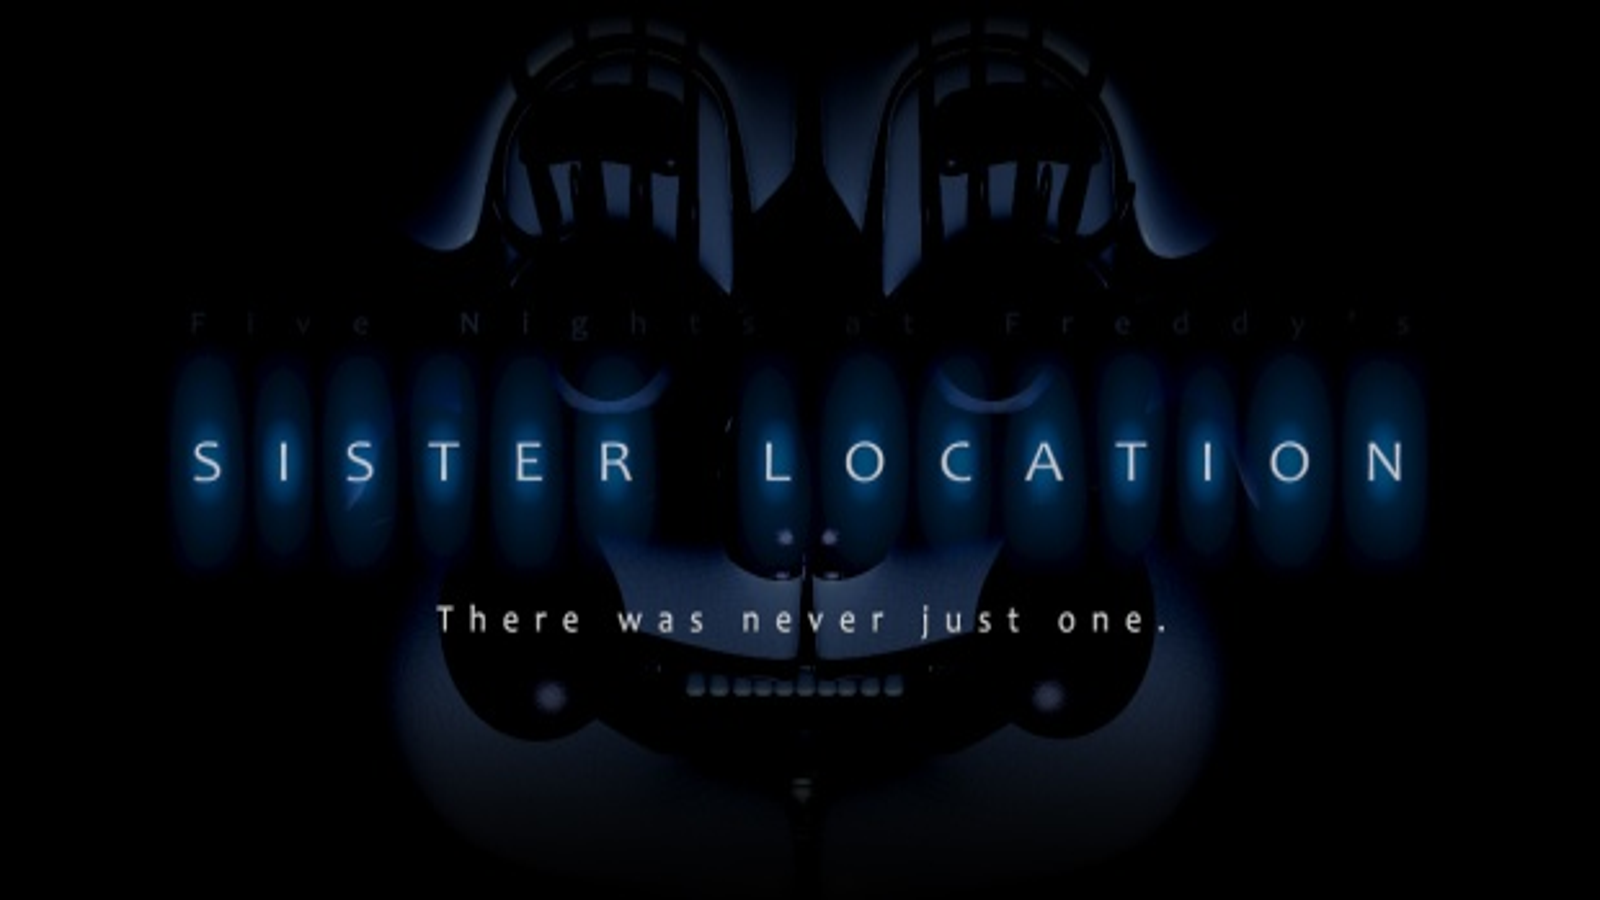 Surprise Five Nights at Freddy's spinoff hits Steam — and it's